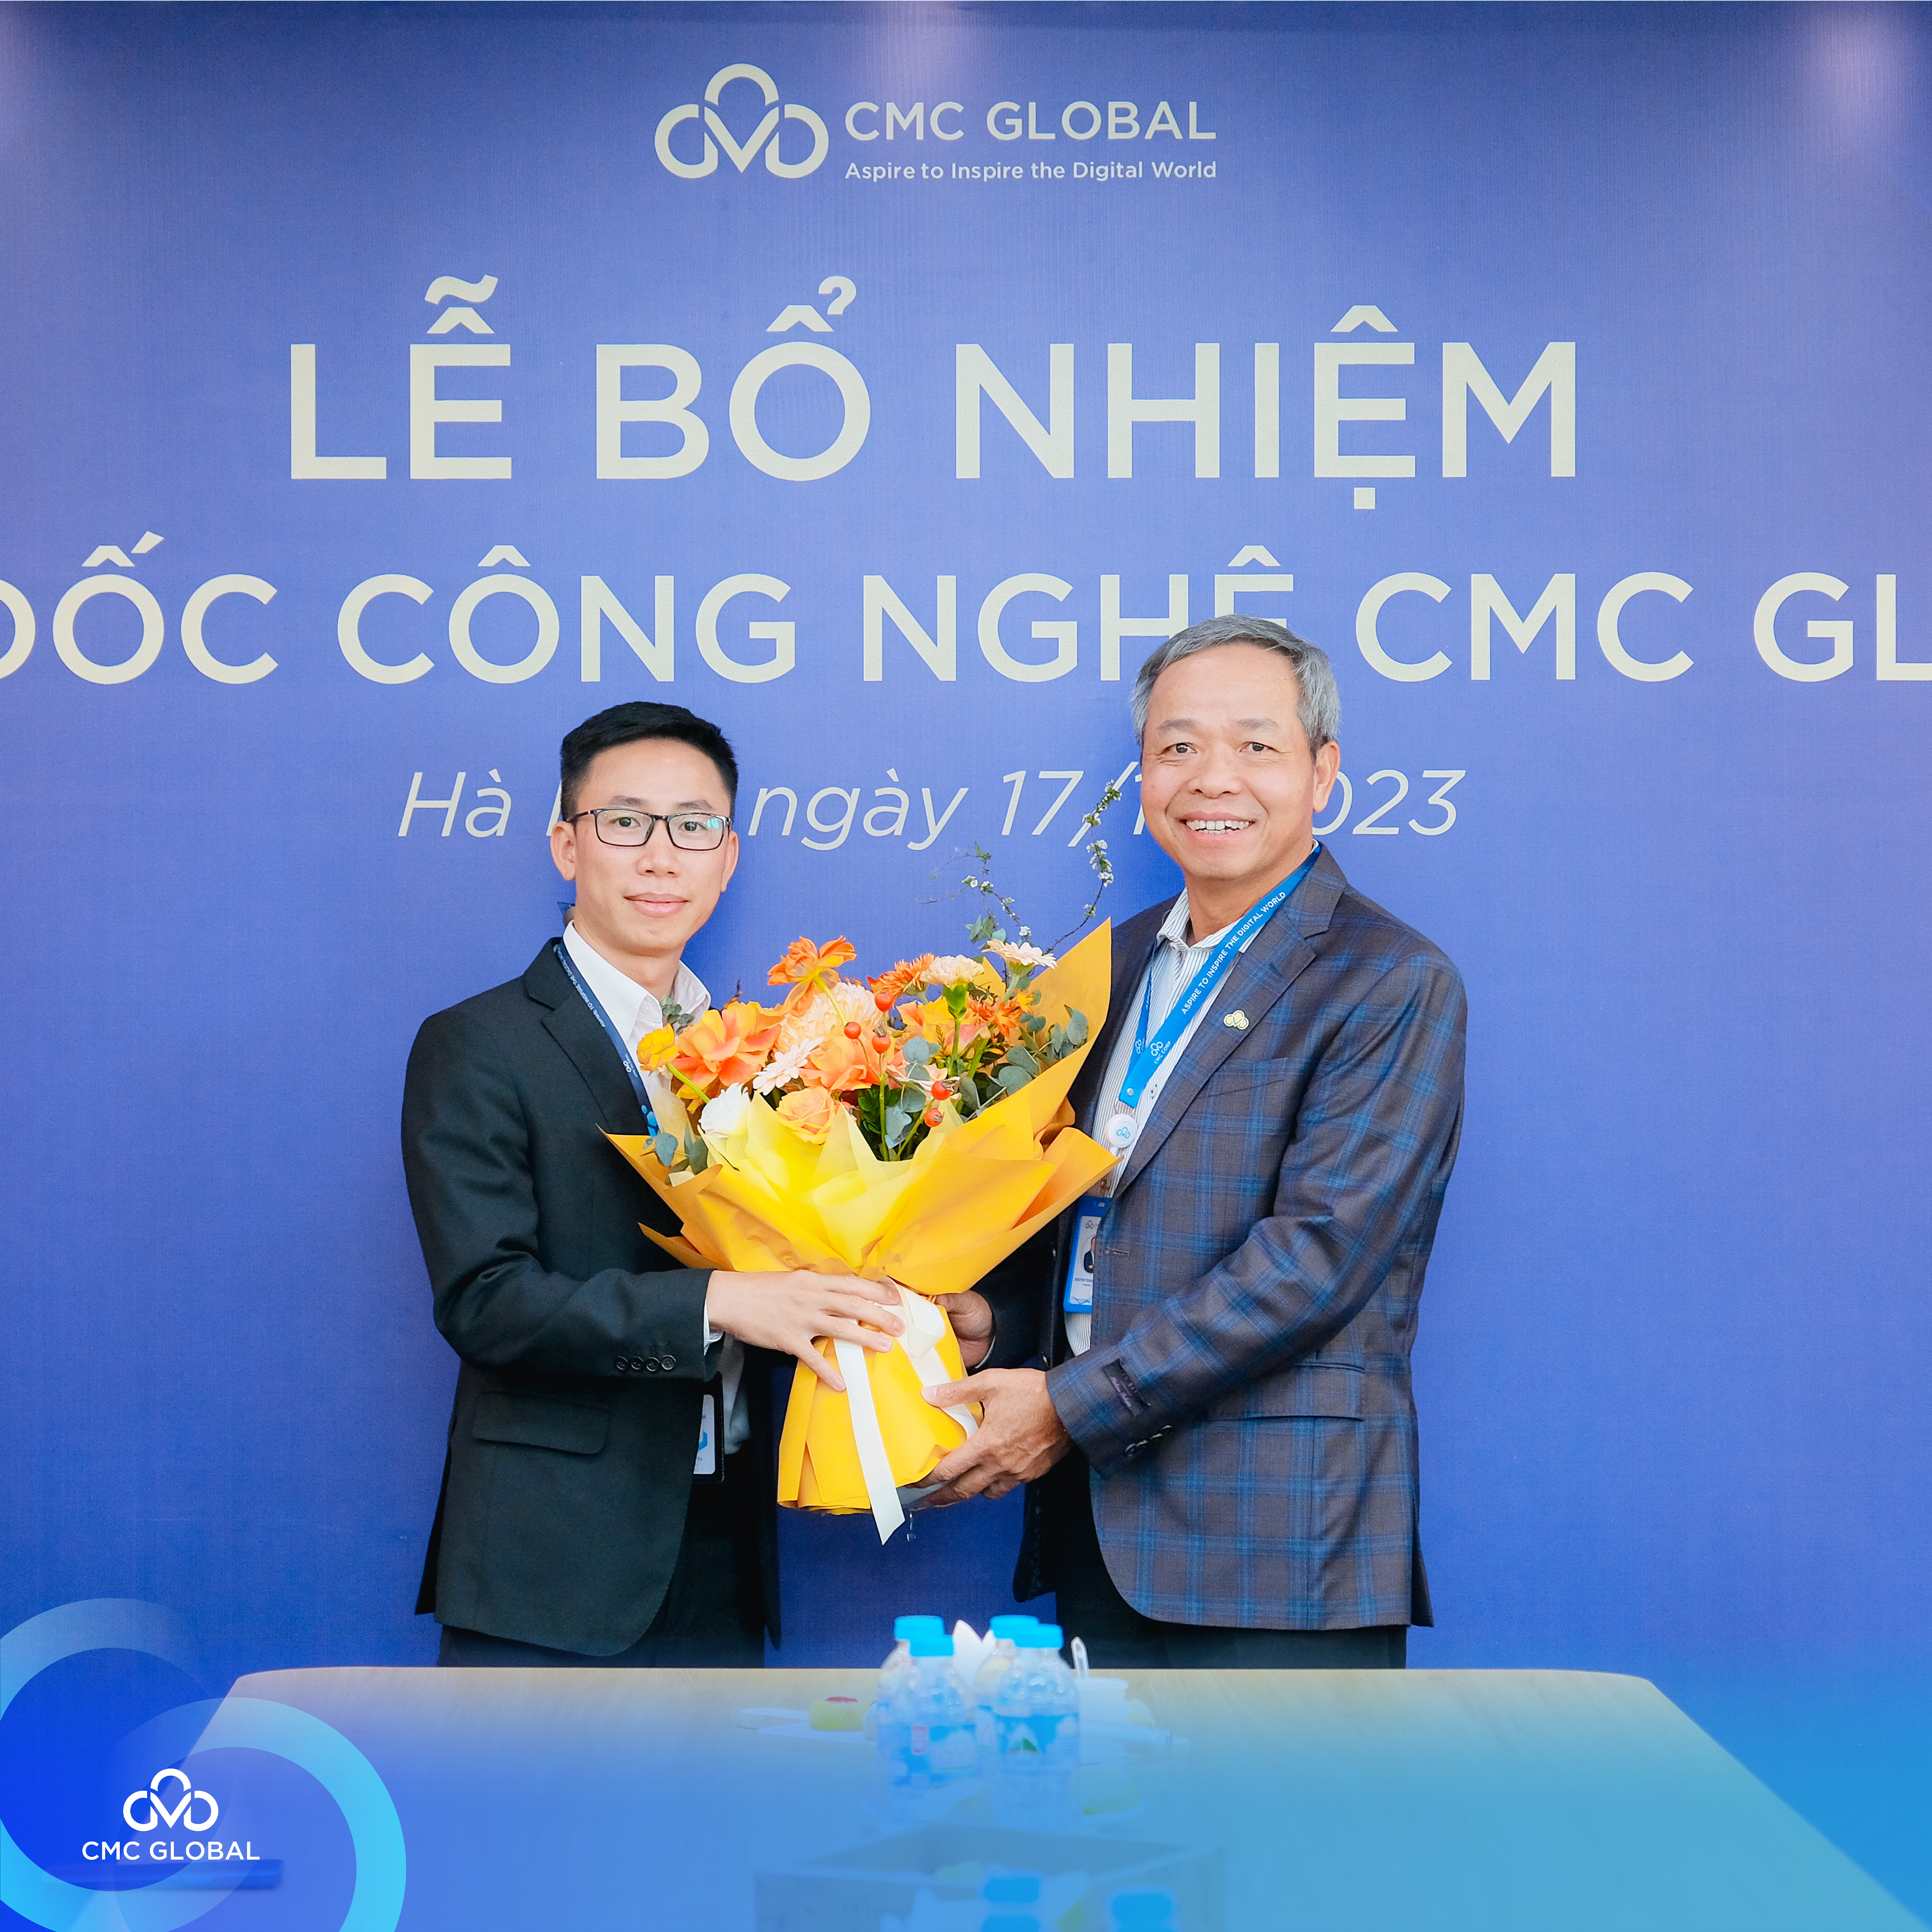 CMC TSSG is the only "Gold Partner" and "Service Delivery Partner" of ForeScout in Vietnam